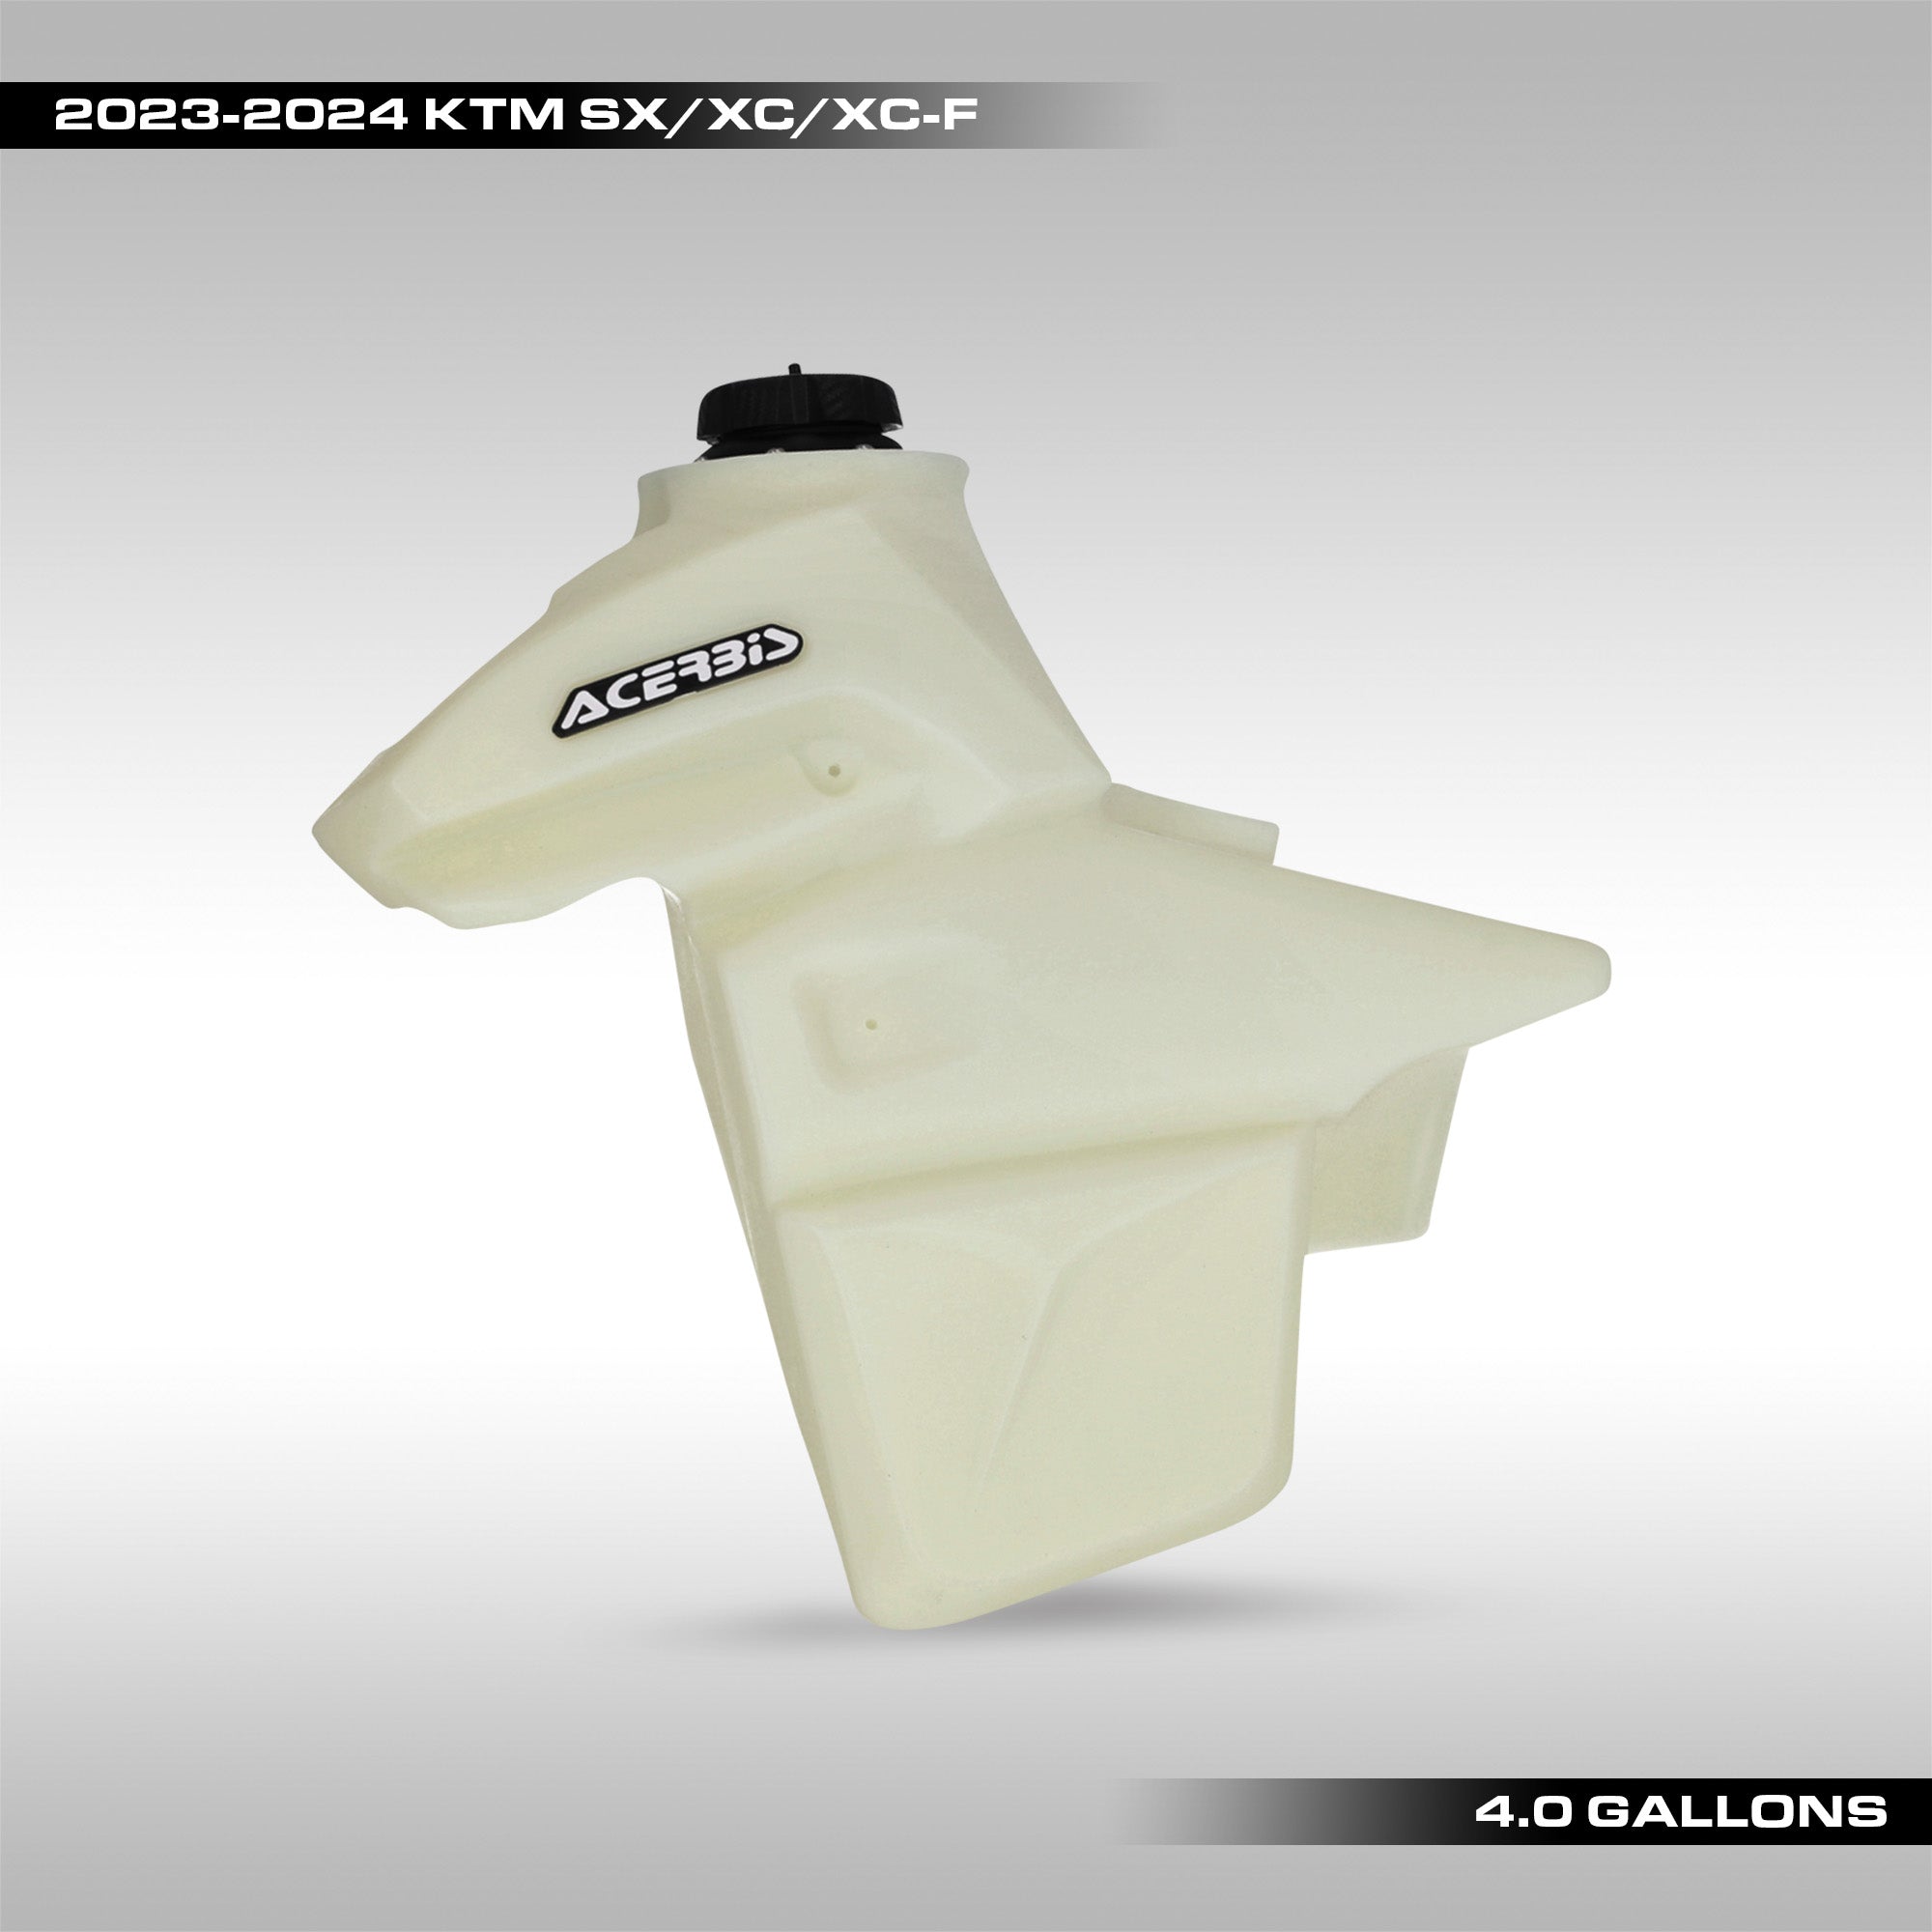 High capacity, long range fuel tank for 2023 - 2024 KTM XC, XC-F and 2024 KTM EXC, XC-W, XCF-W, XW-F models. 4 gallon fuel tank for the new KTM dirtbikes, enduro bikes and dualsports. Available in clear / natural or black.